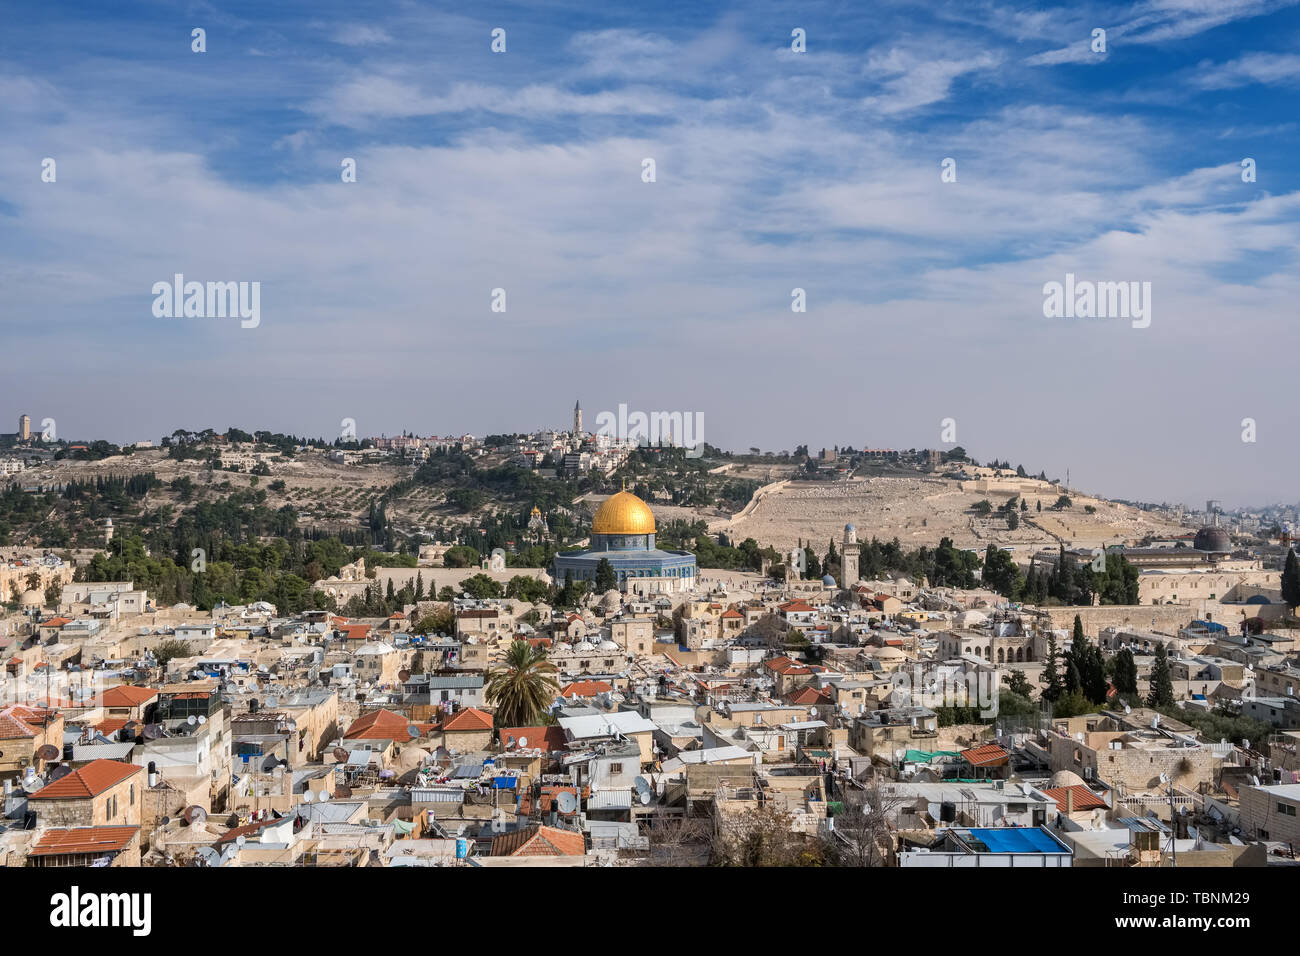 Dome of the Rock and  Mount of Olives in Jerusalem old city Stock Photo